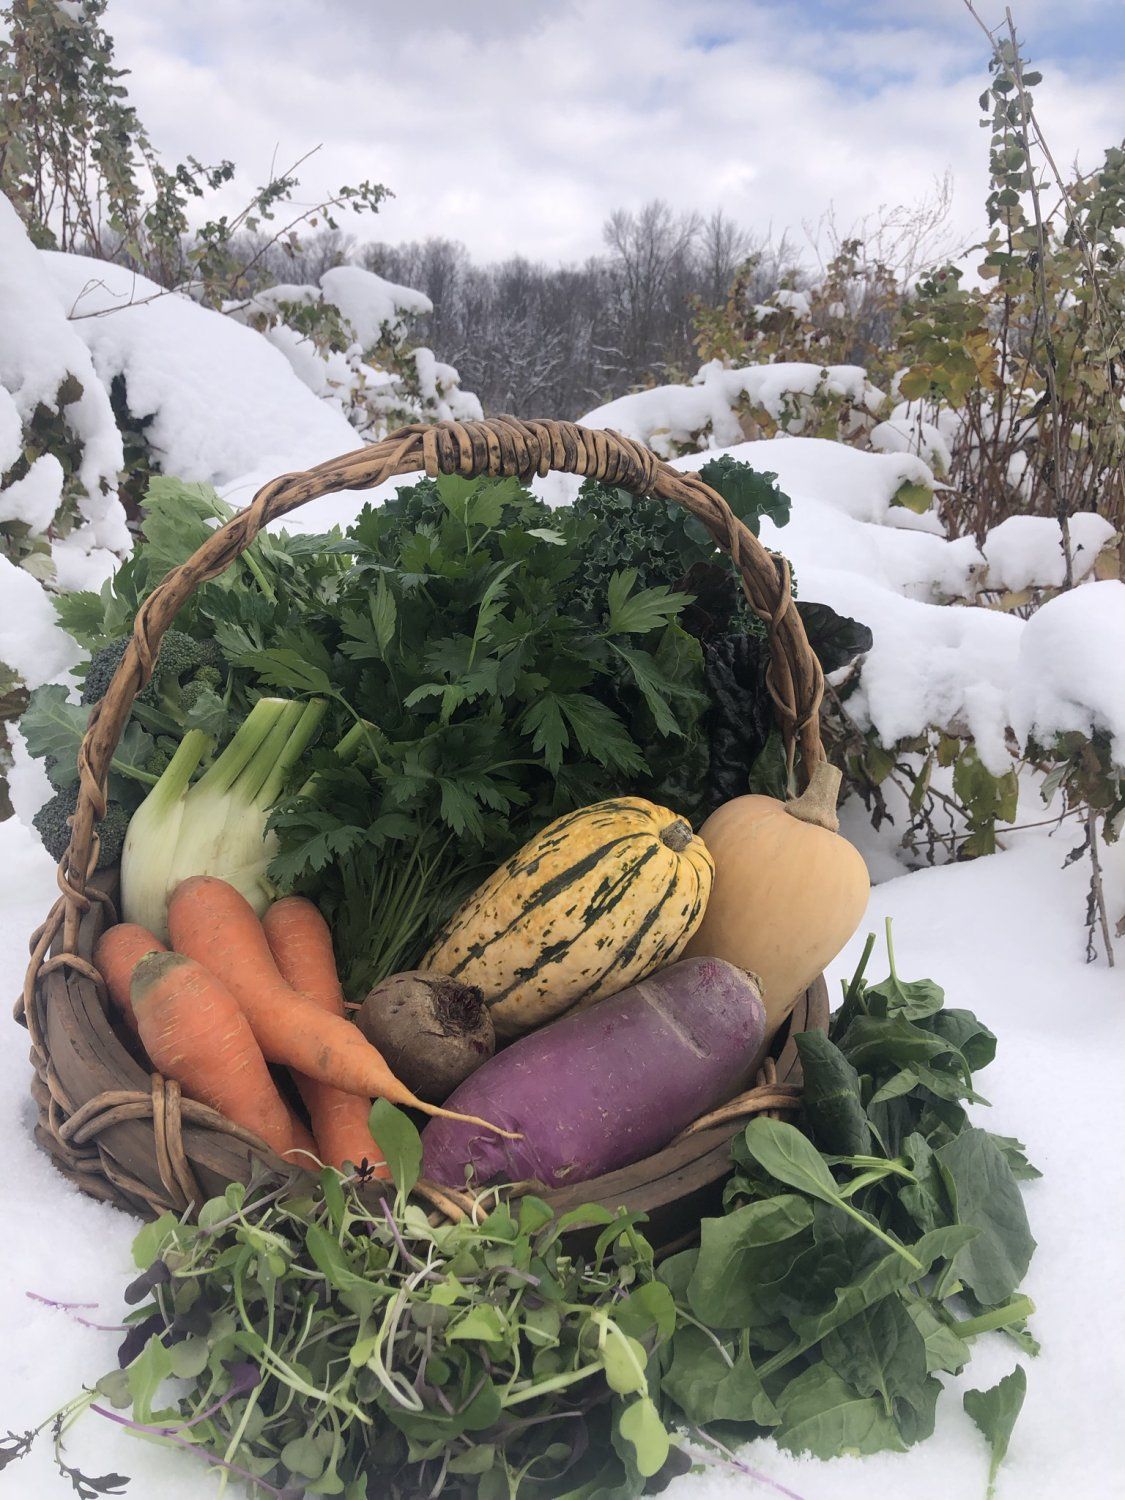 Previous Happening: Farm Happening Nov 24 - Welcome Winter